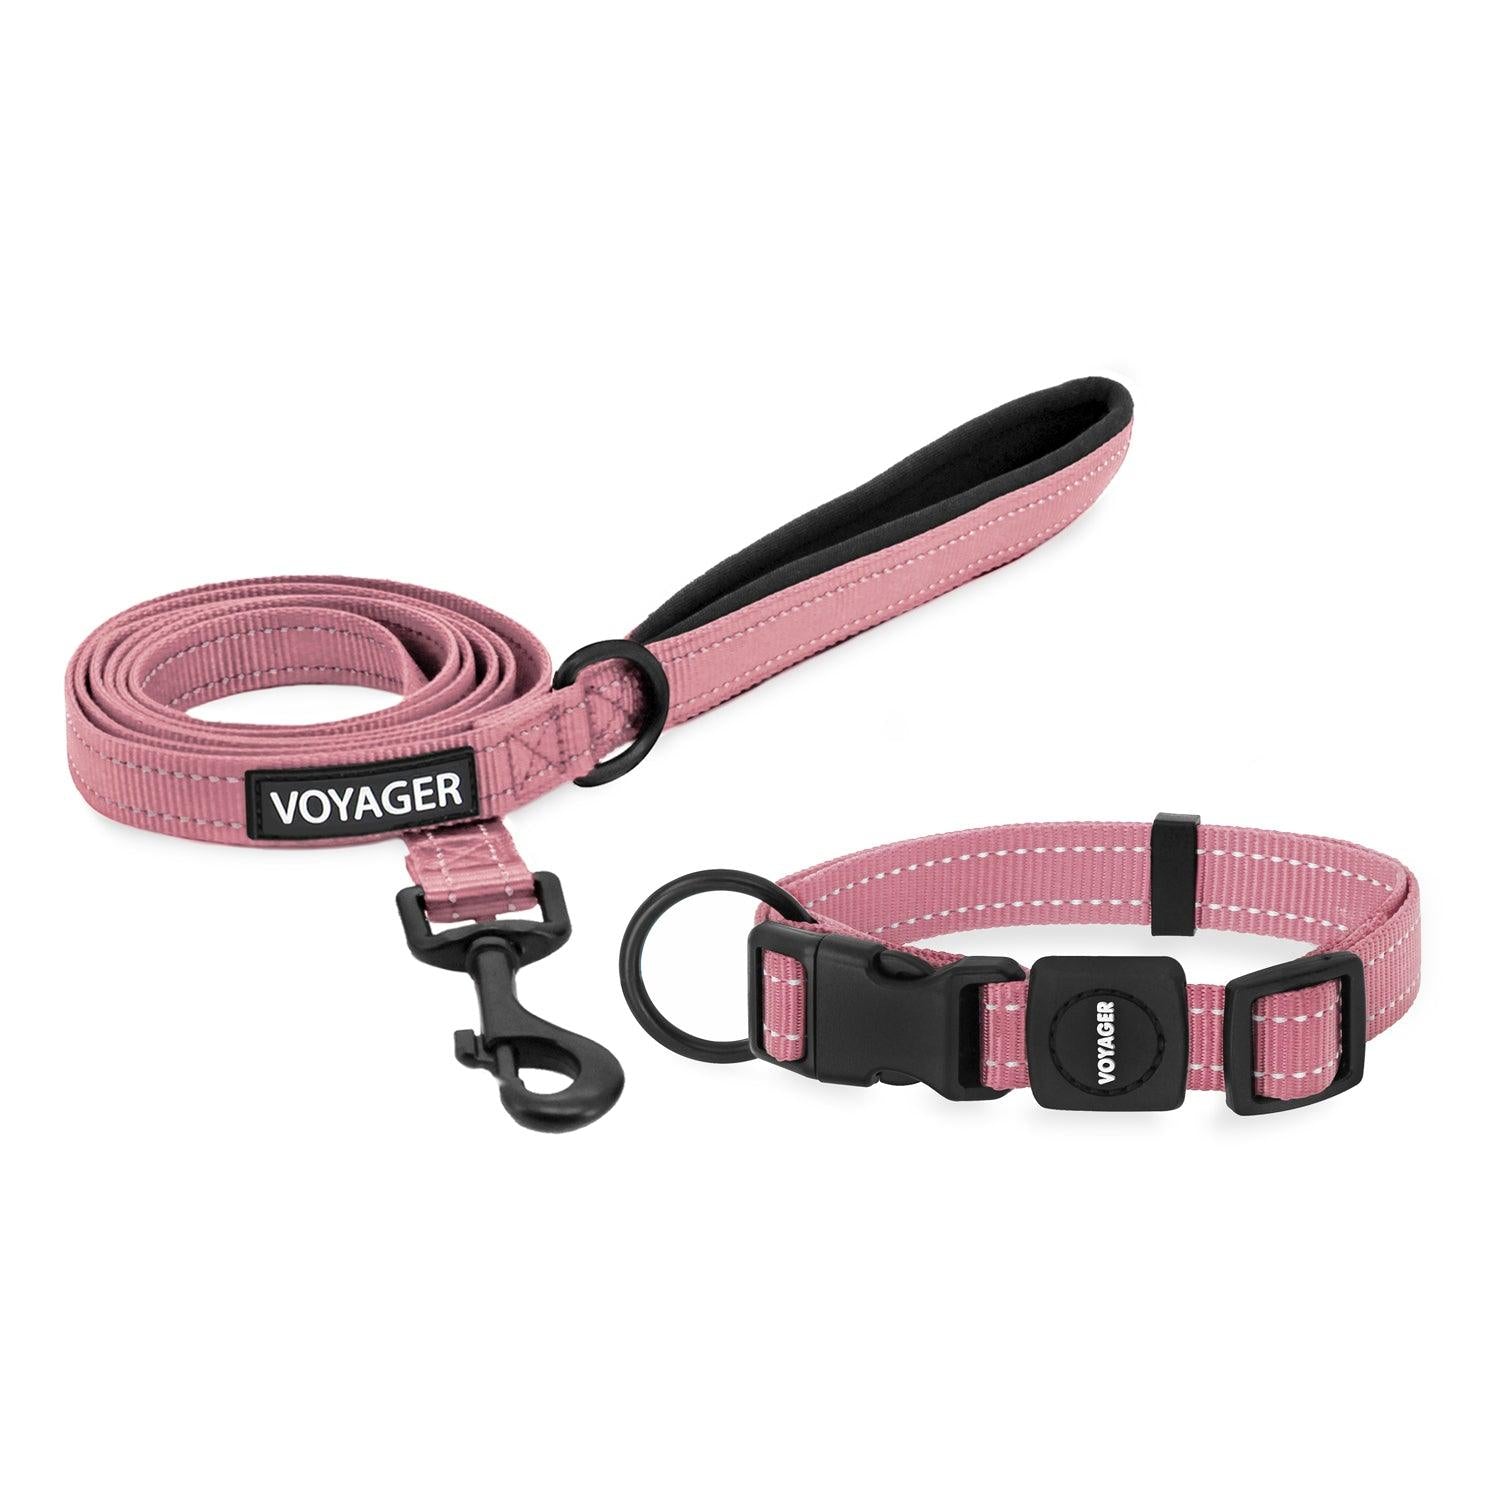 Voyager Reflective Dog Leash Collar Set with Neoprene Handle Supports Small, Medium, and Large Breed Puppies, Cute and Heavy Duty for Walking, Running